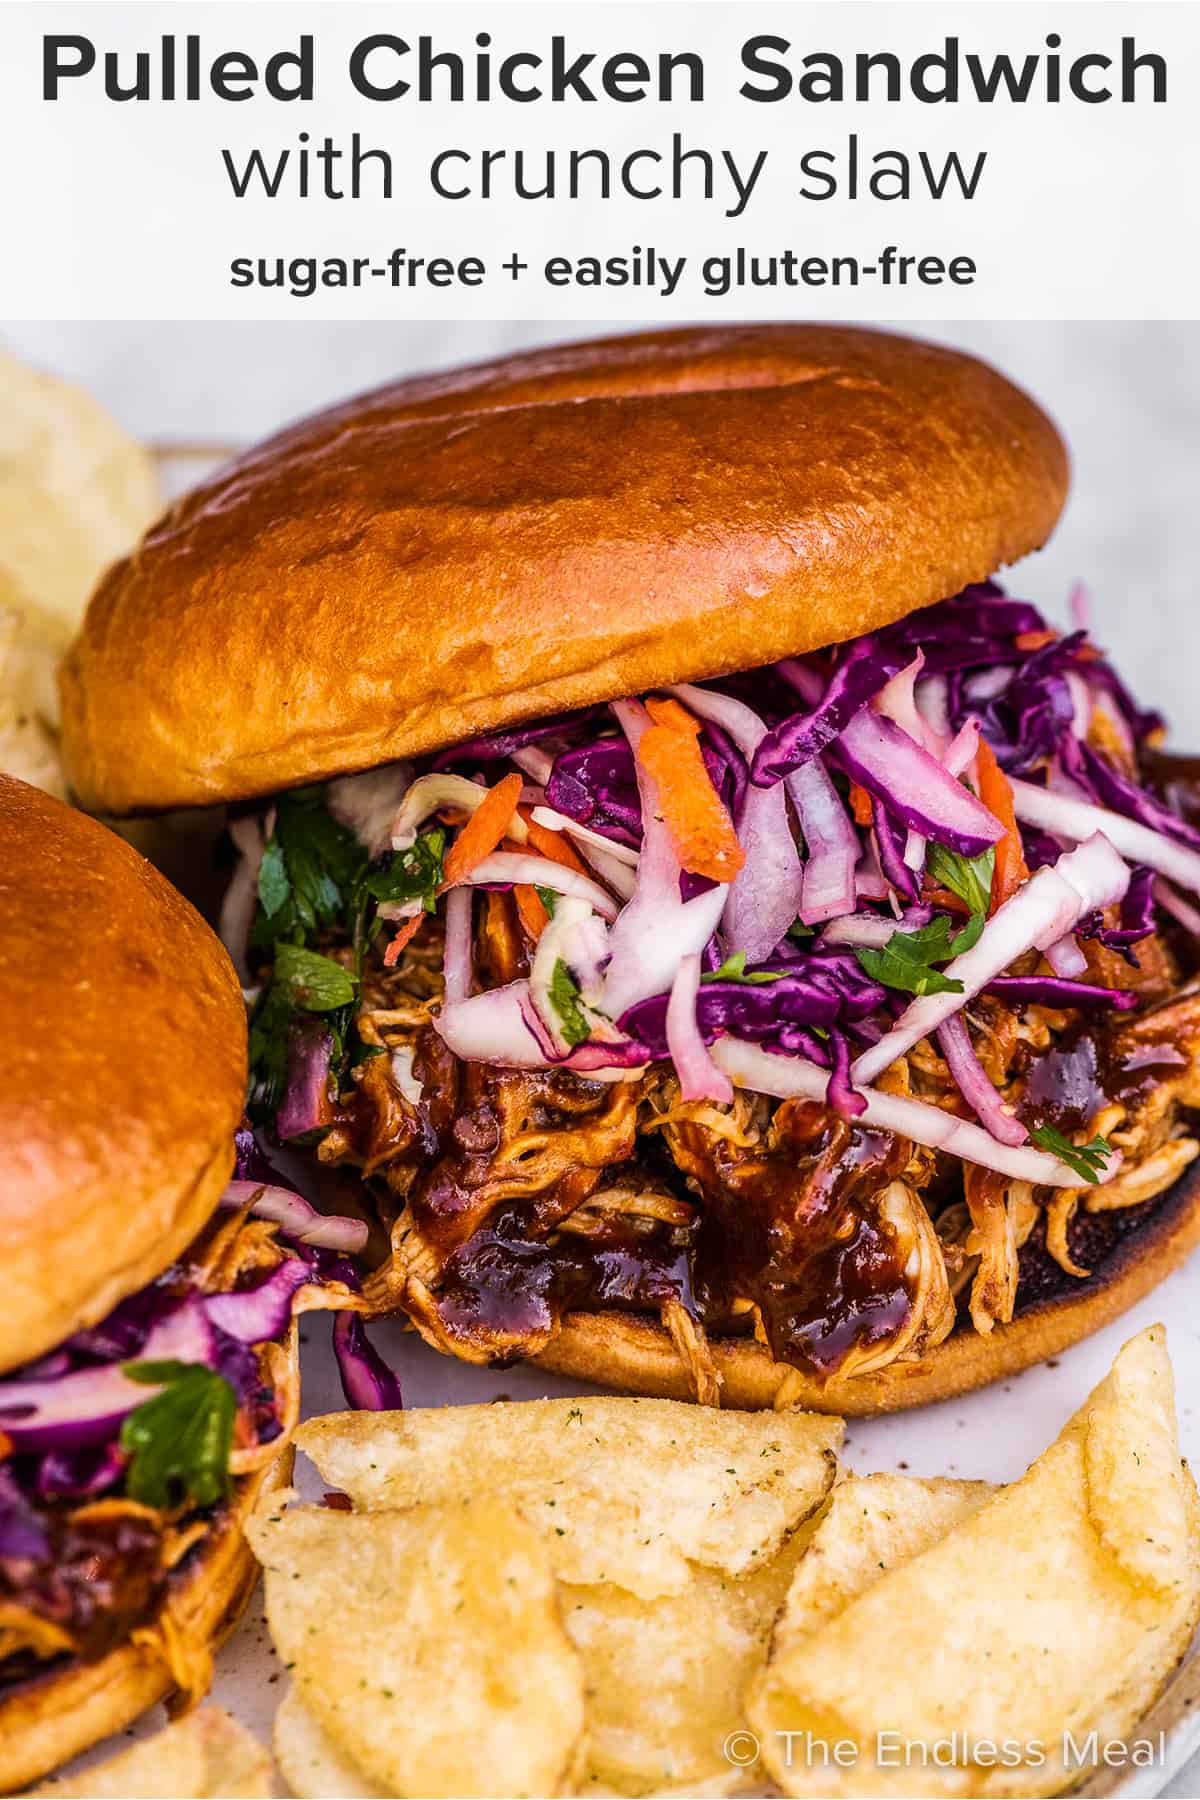 A pulled chicken sandwich on a lunch plate and the recipe title on top of the picture.